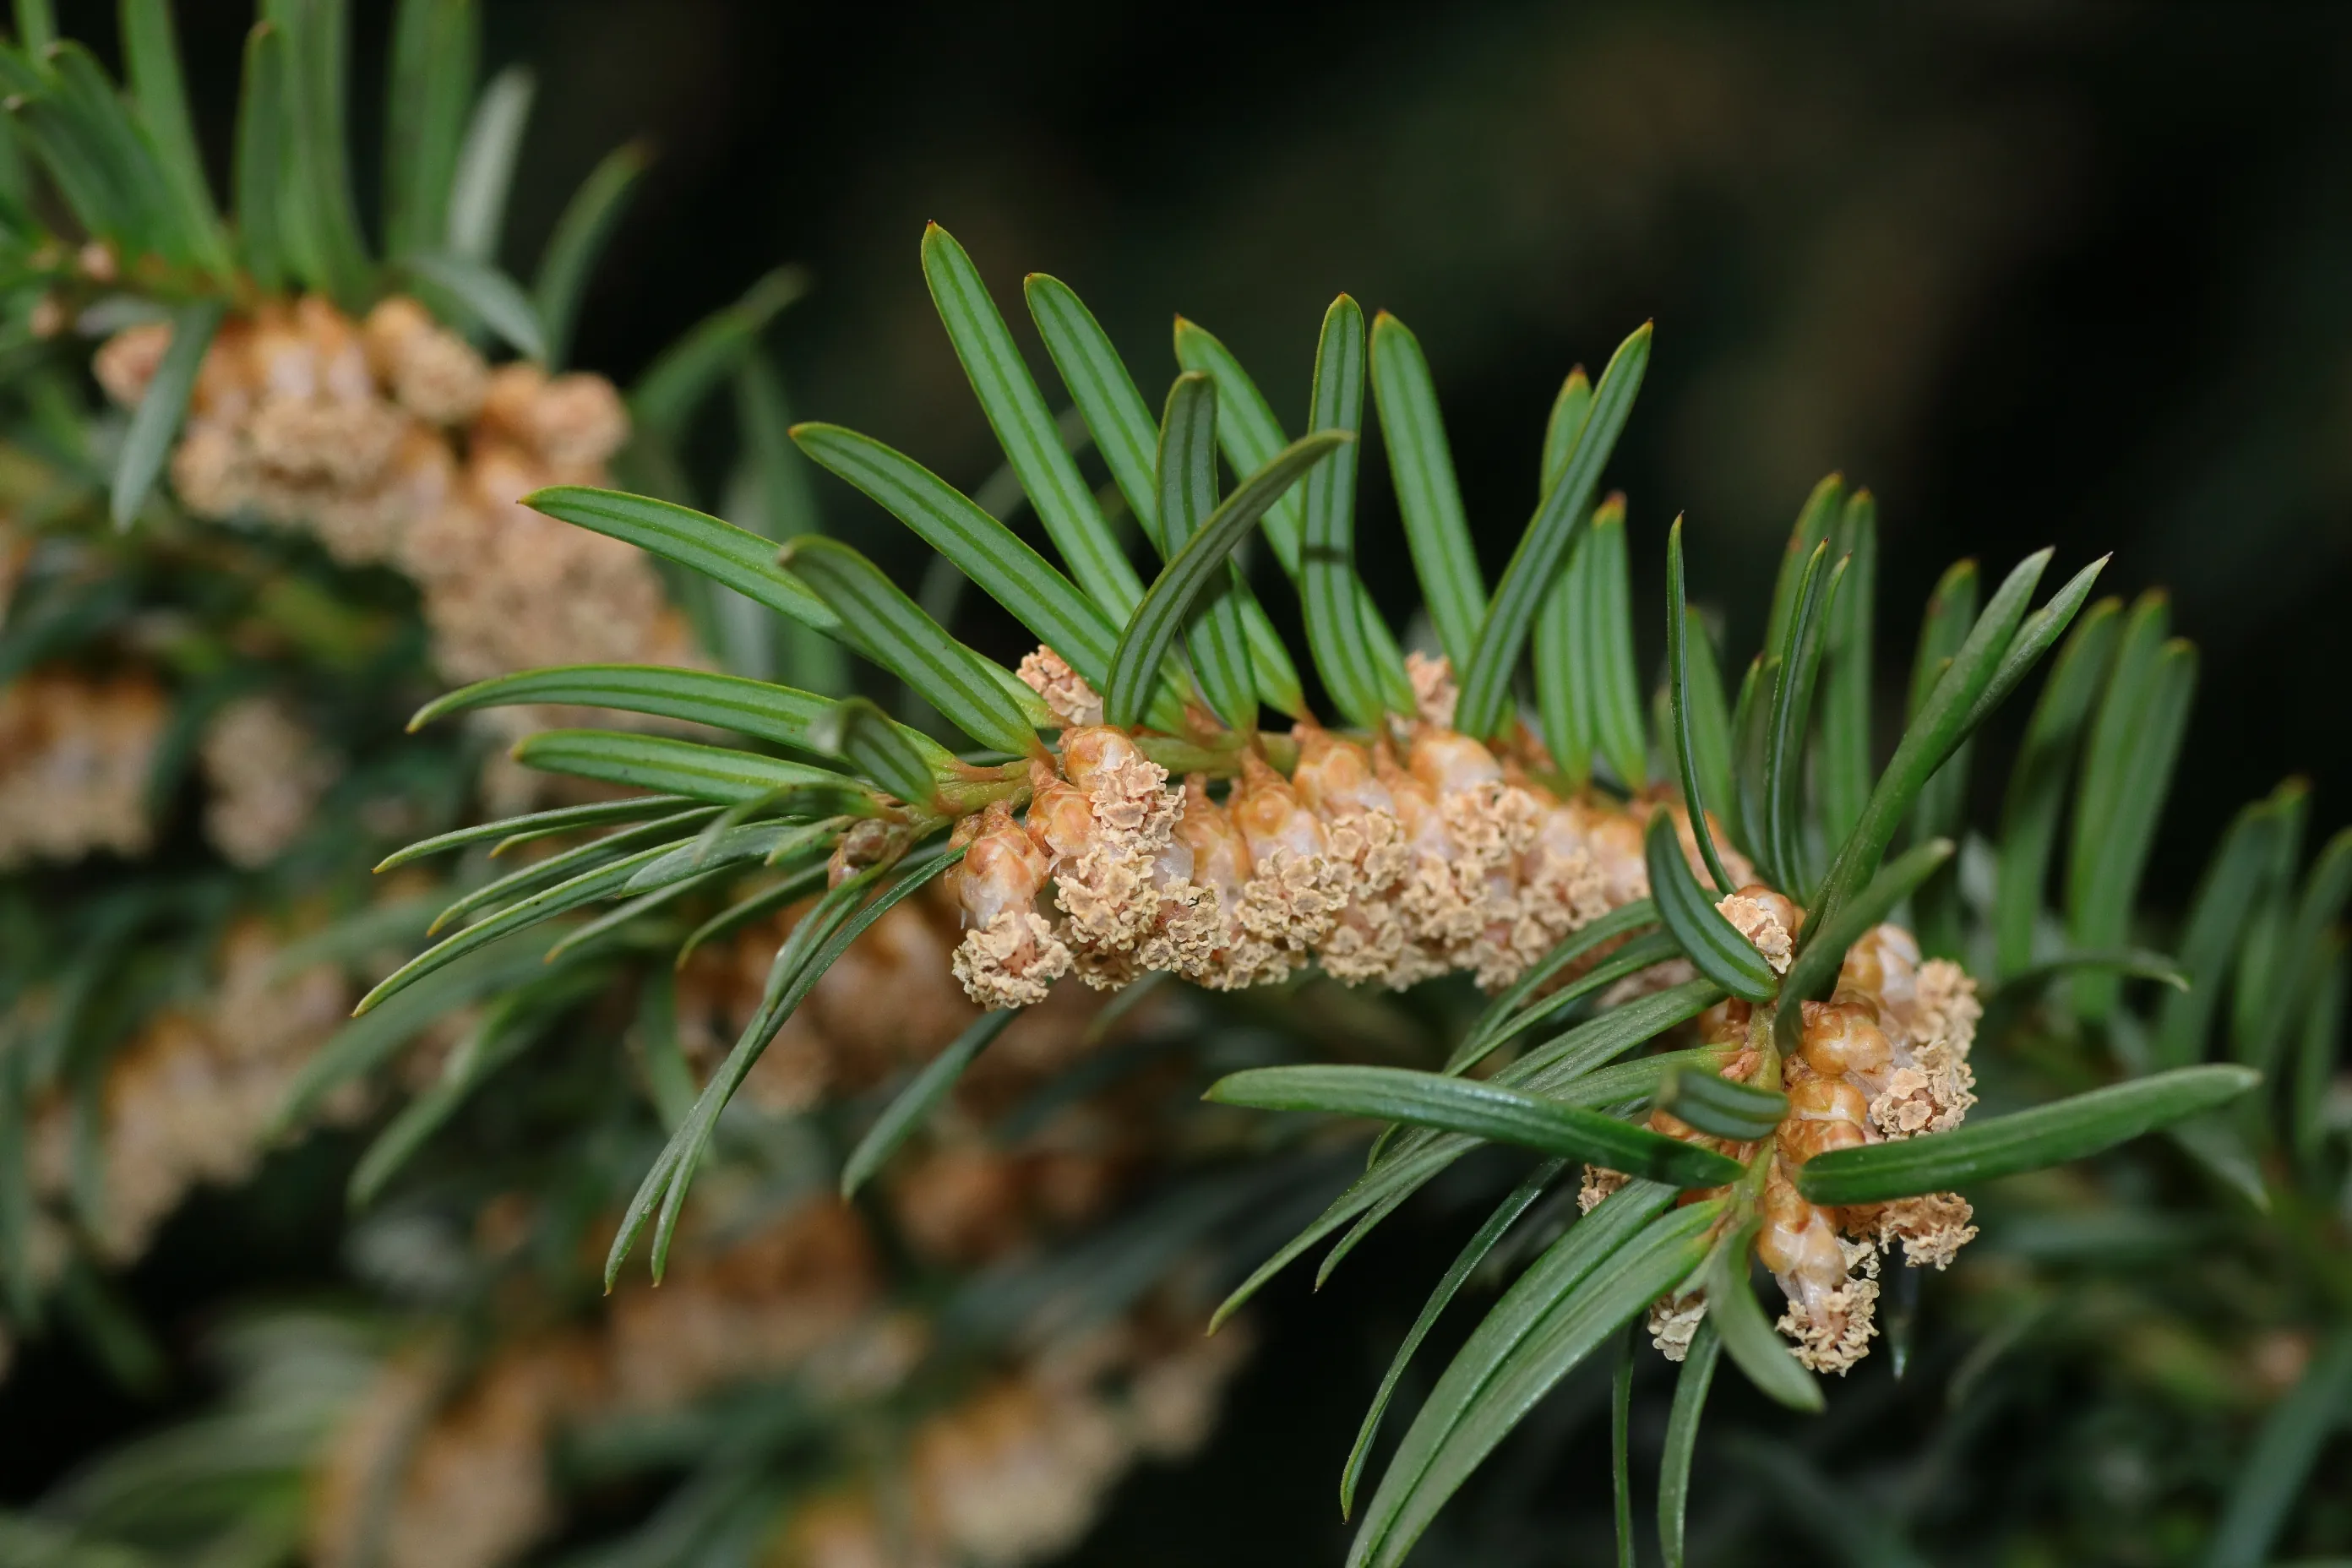 Male flowers of the european yew - yellow-brown bell-shaped flowers growing close to the branches